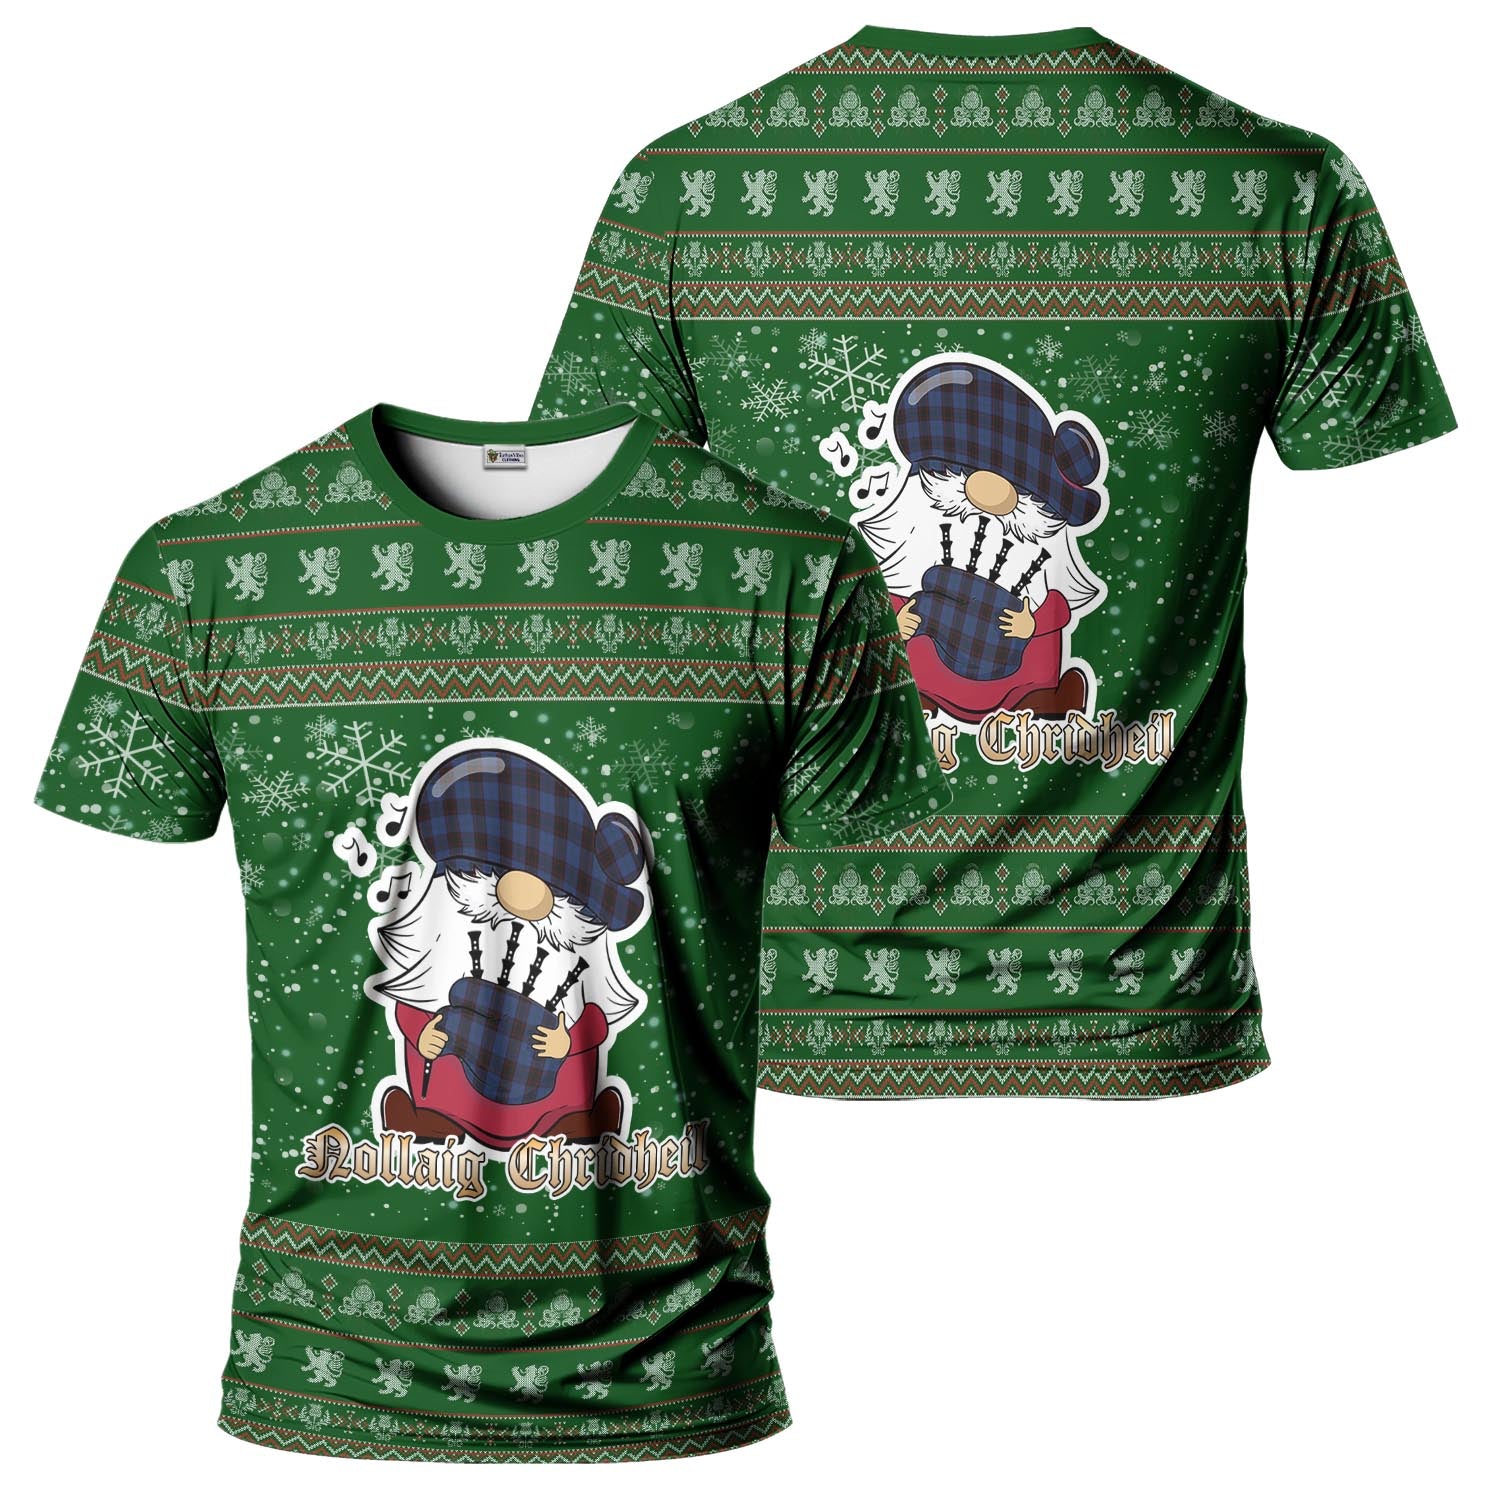 Home (Hume) Clan Christmas Family T-Shirt with Funny Gnome Playing Bagpipes Men's Shirt Green - Tartanvibesclothing